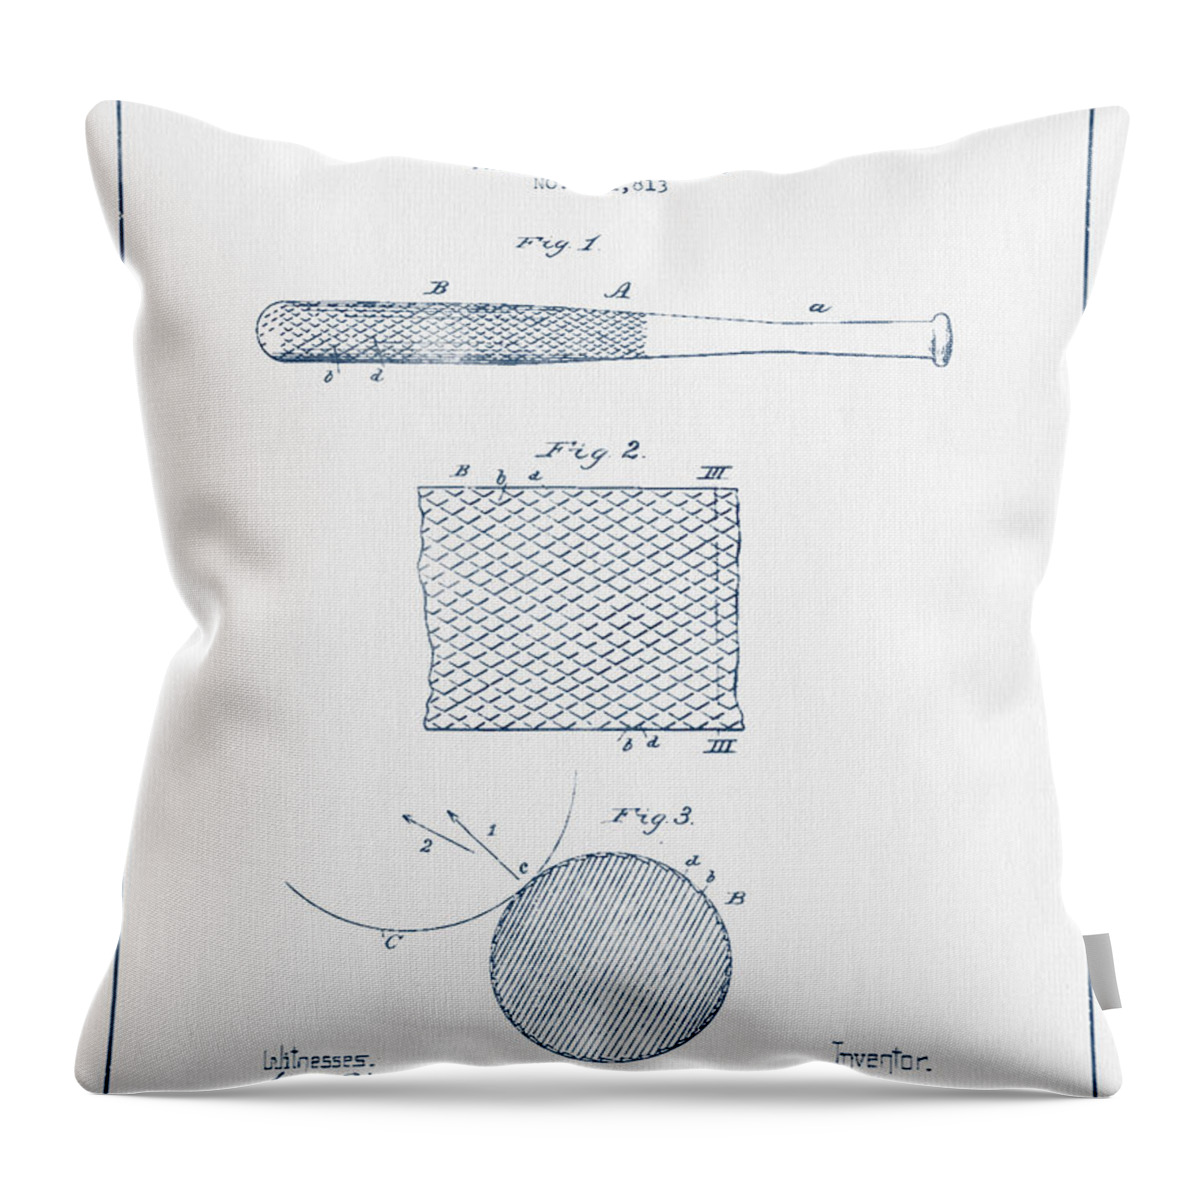 Baseball Throw Pillow featuring the digital art Baseball Bat Patent Drawing From 1904 - Blue Ink by Aged Pixel